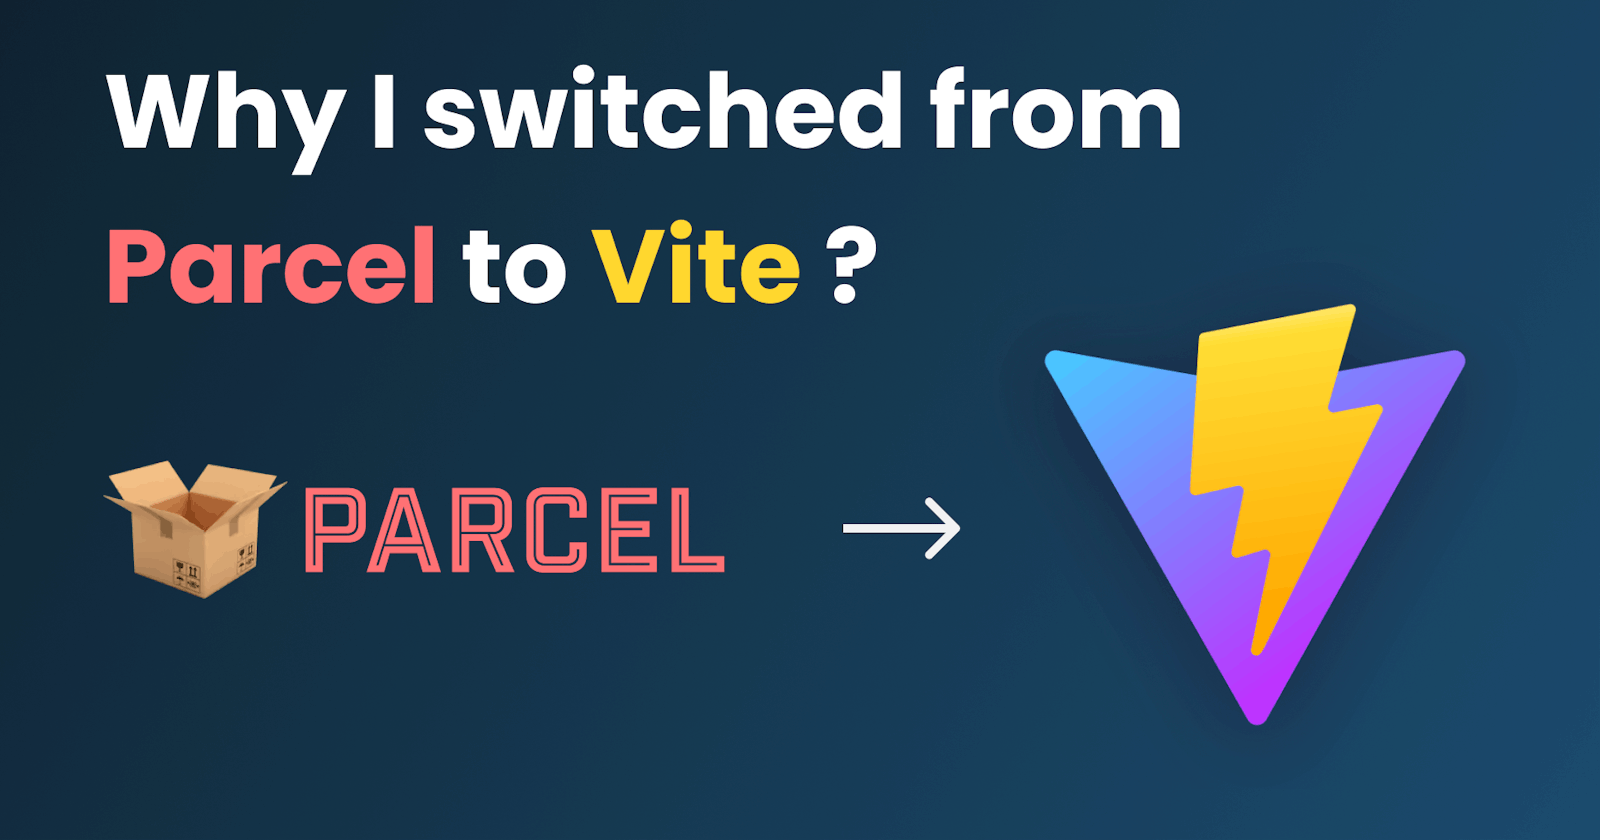 Why I switched from Parcel to Vite ?